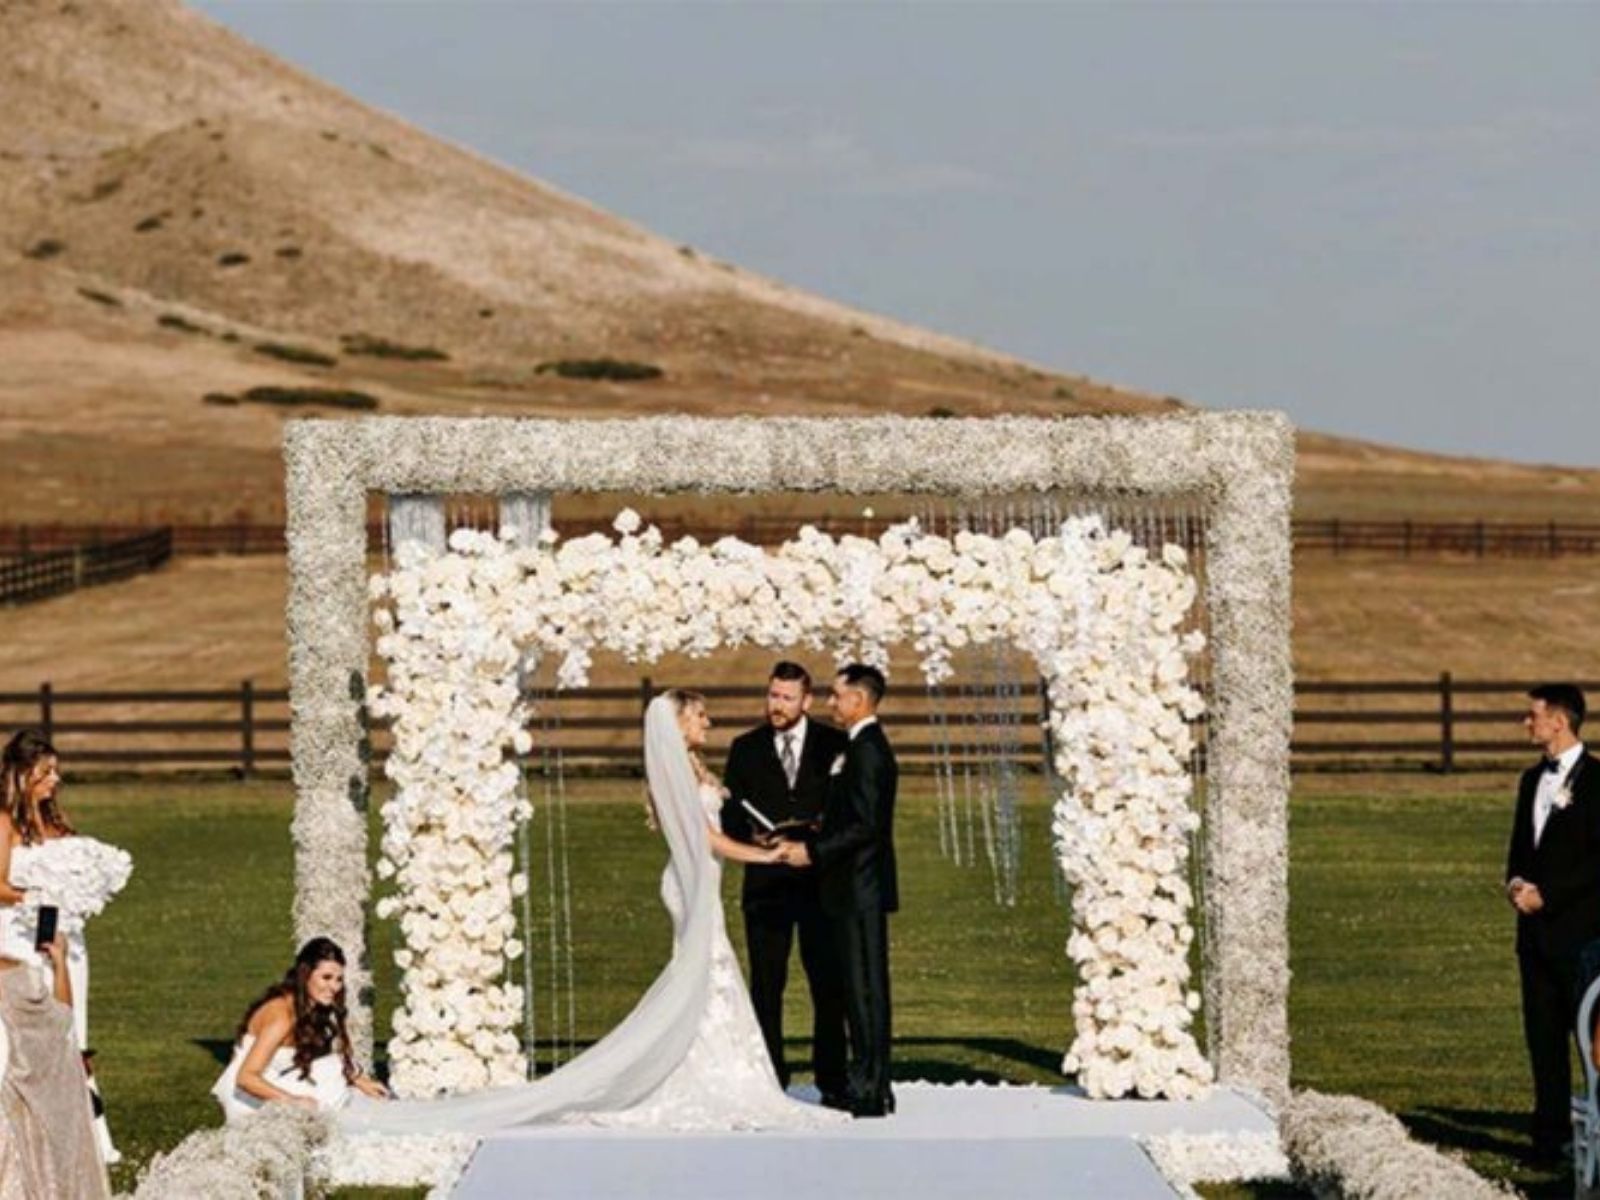 White backdrop wedding - countryside wedding ceremony - The Olive & Poppy - florists review on thursd